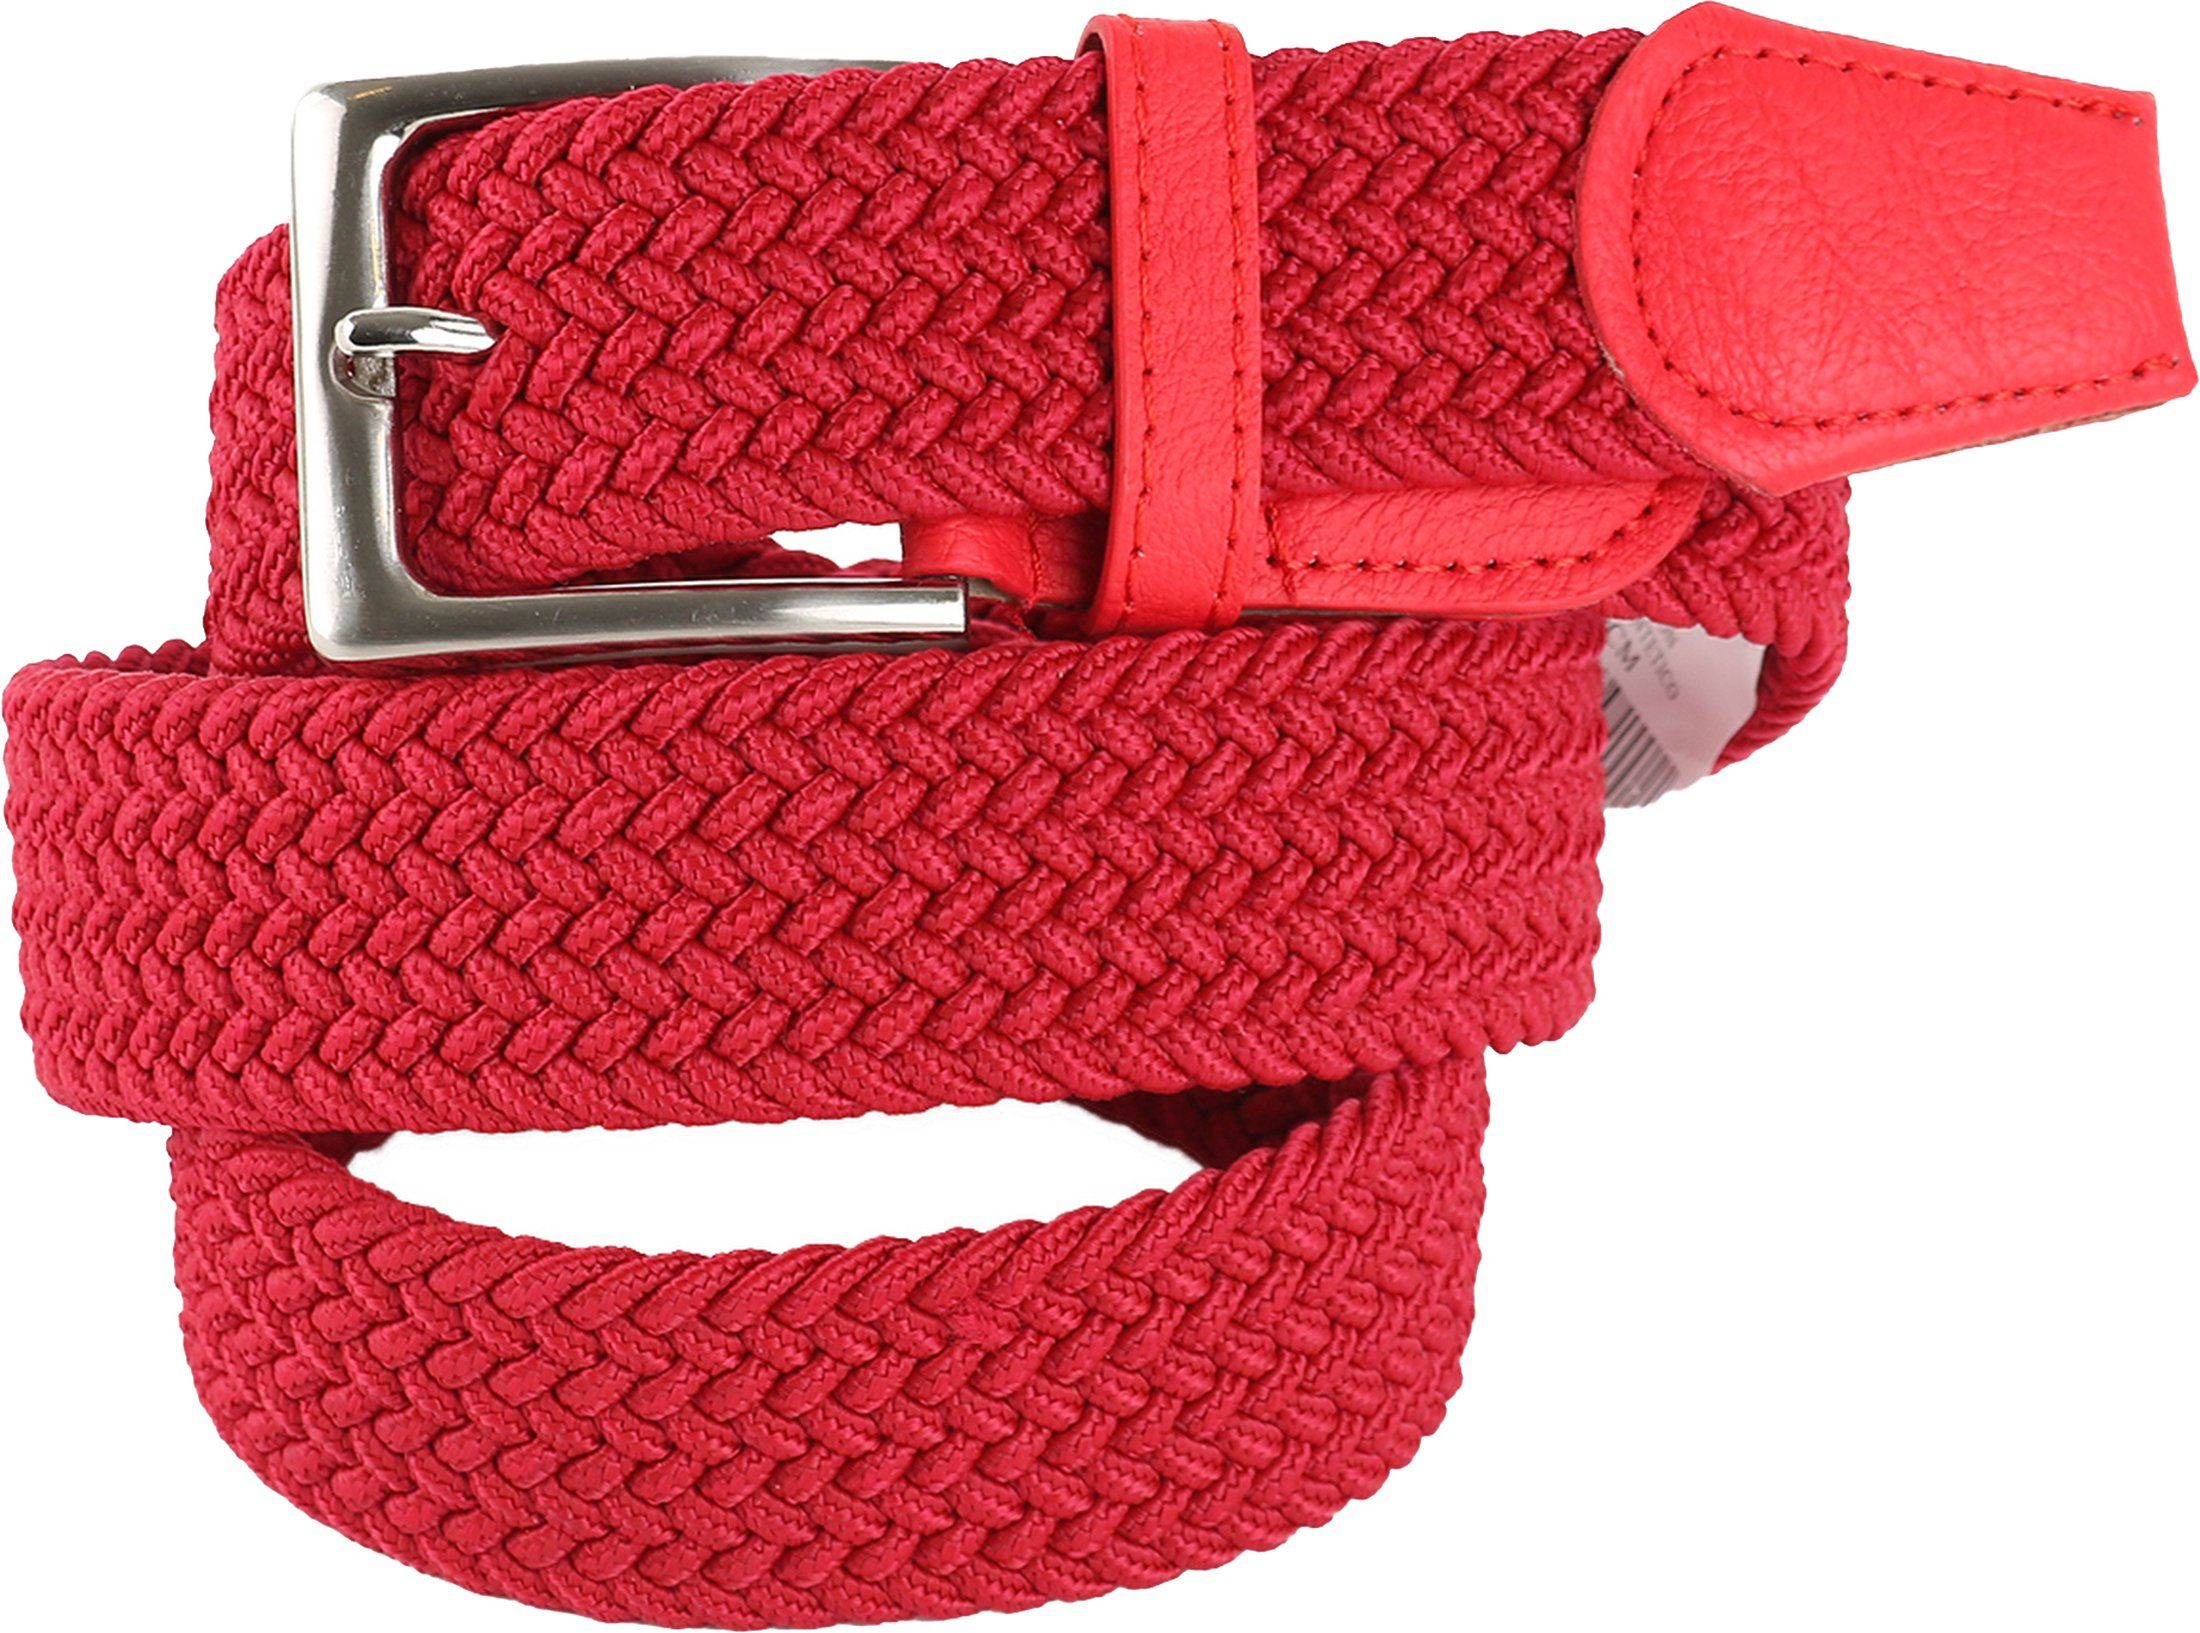 Woven Belt Red size 37.4